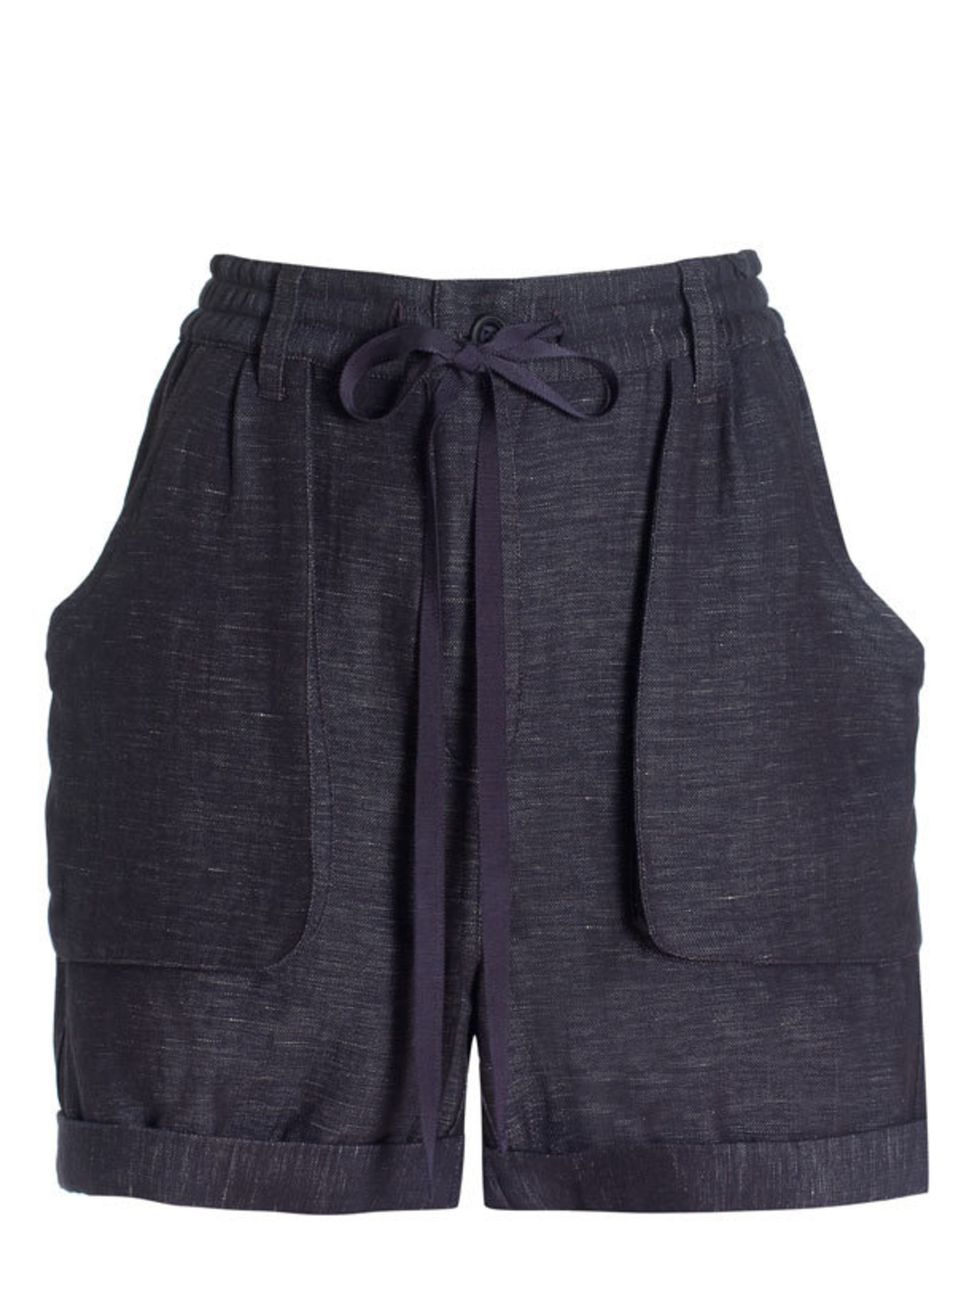 <p>Studio Nicholson ribbon tie shorts, £165, at The Shop at Bluebird, for stockists call 0207 351 3873</p>